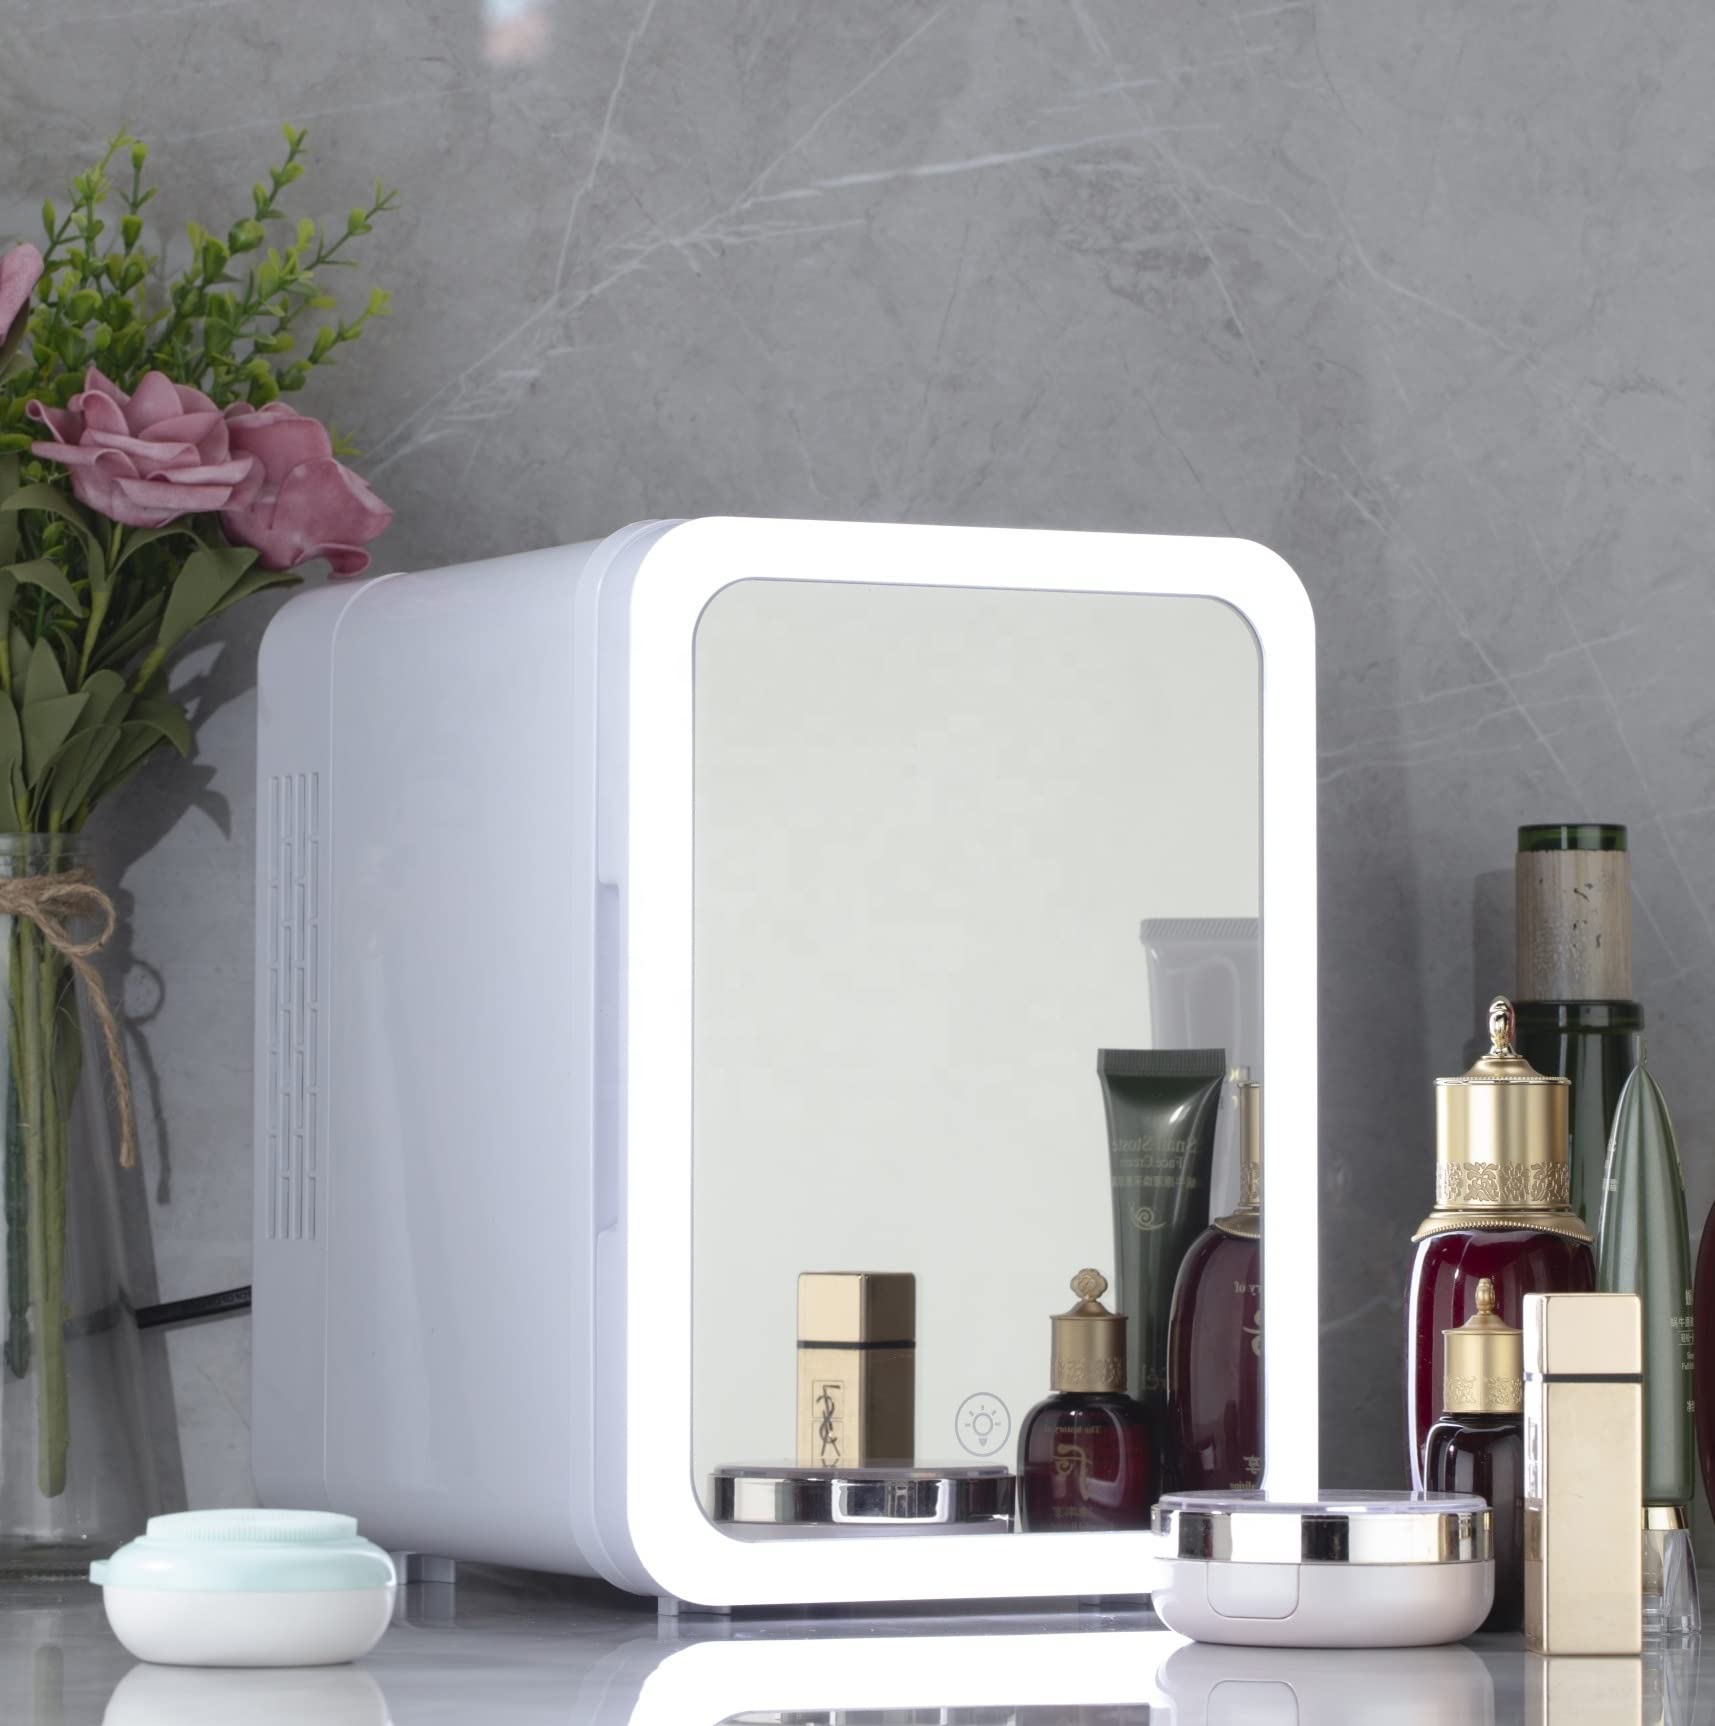 ACADA Mini Beauty Fridge 8/12L with LED Lighted Mirror - Portable Mini Fridge for Skincare Makeup Mask Drinks Fruits, Cooler & Warmer Dual Purpose Silent for Bedroom Office Vanity Vehicle (8L)